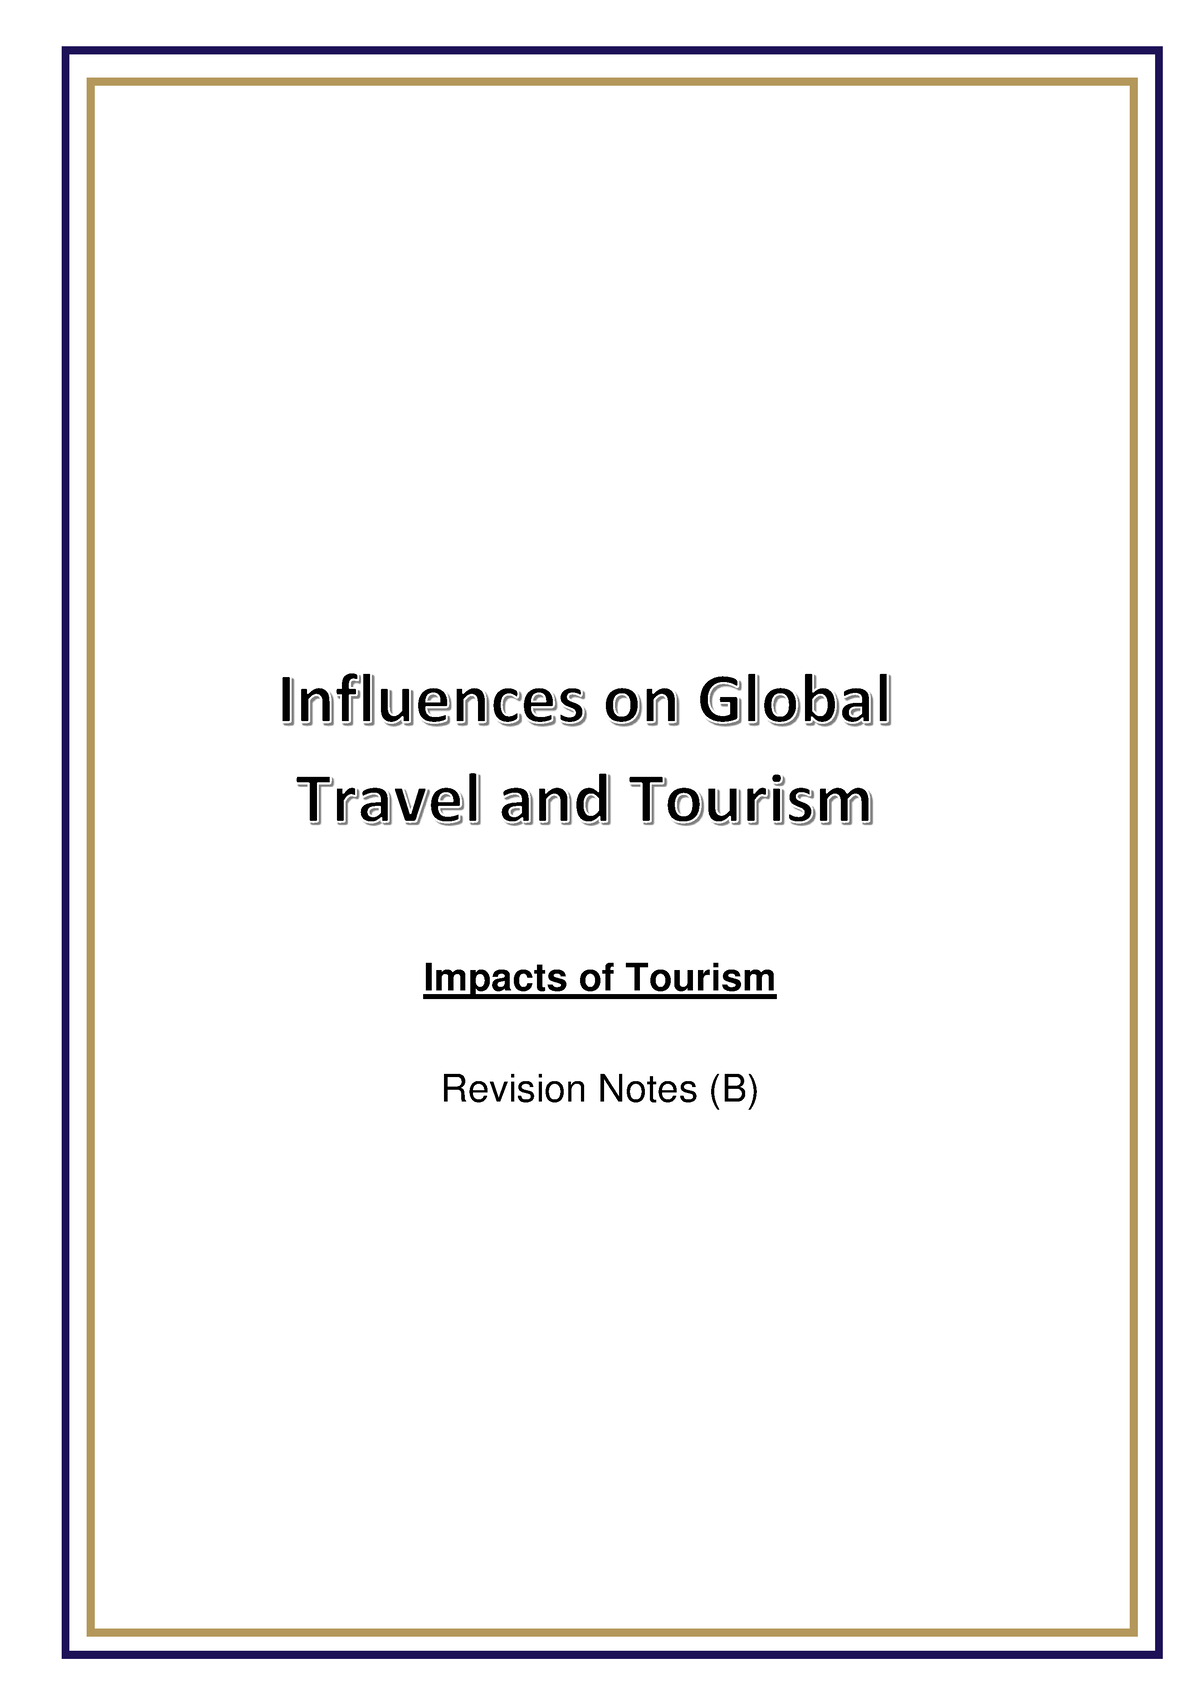 travel and tourism revision notes